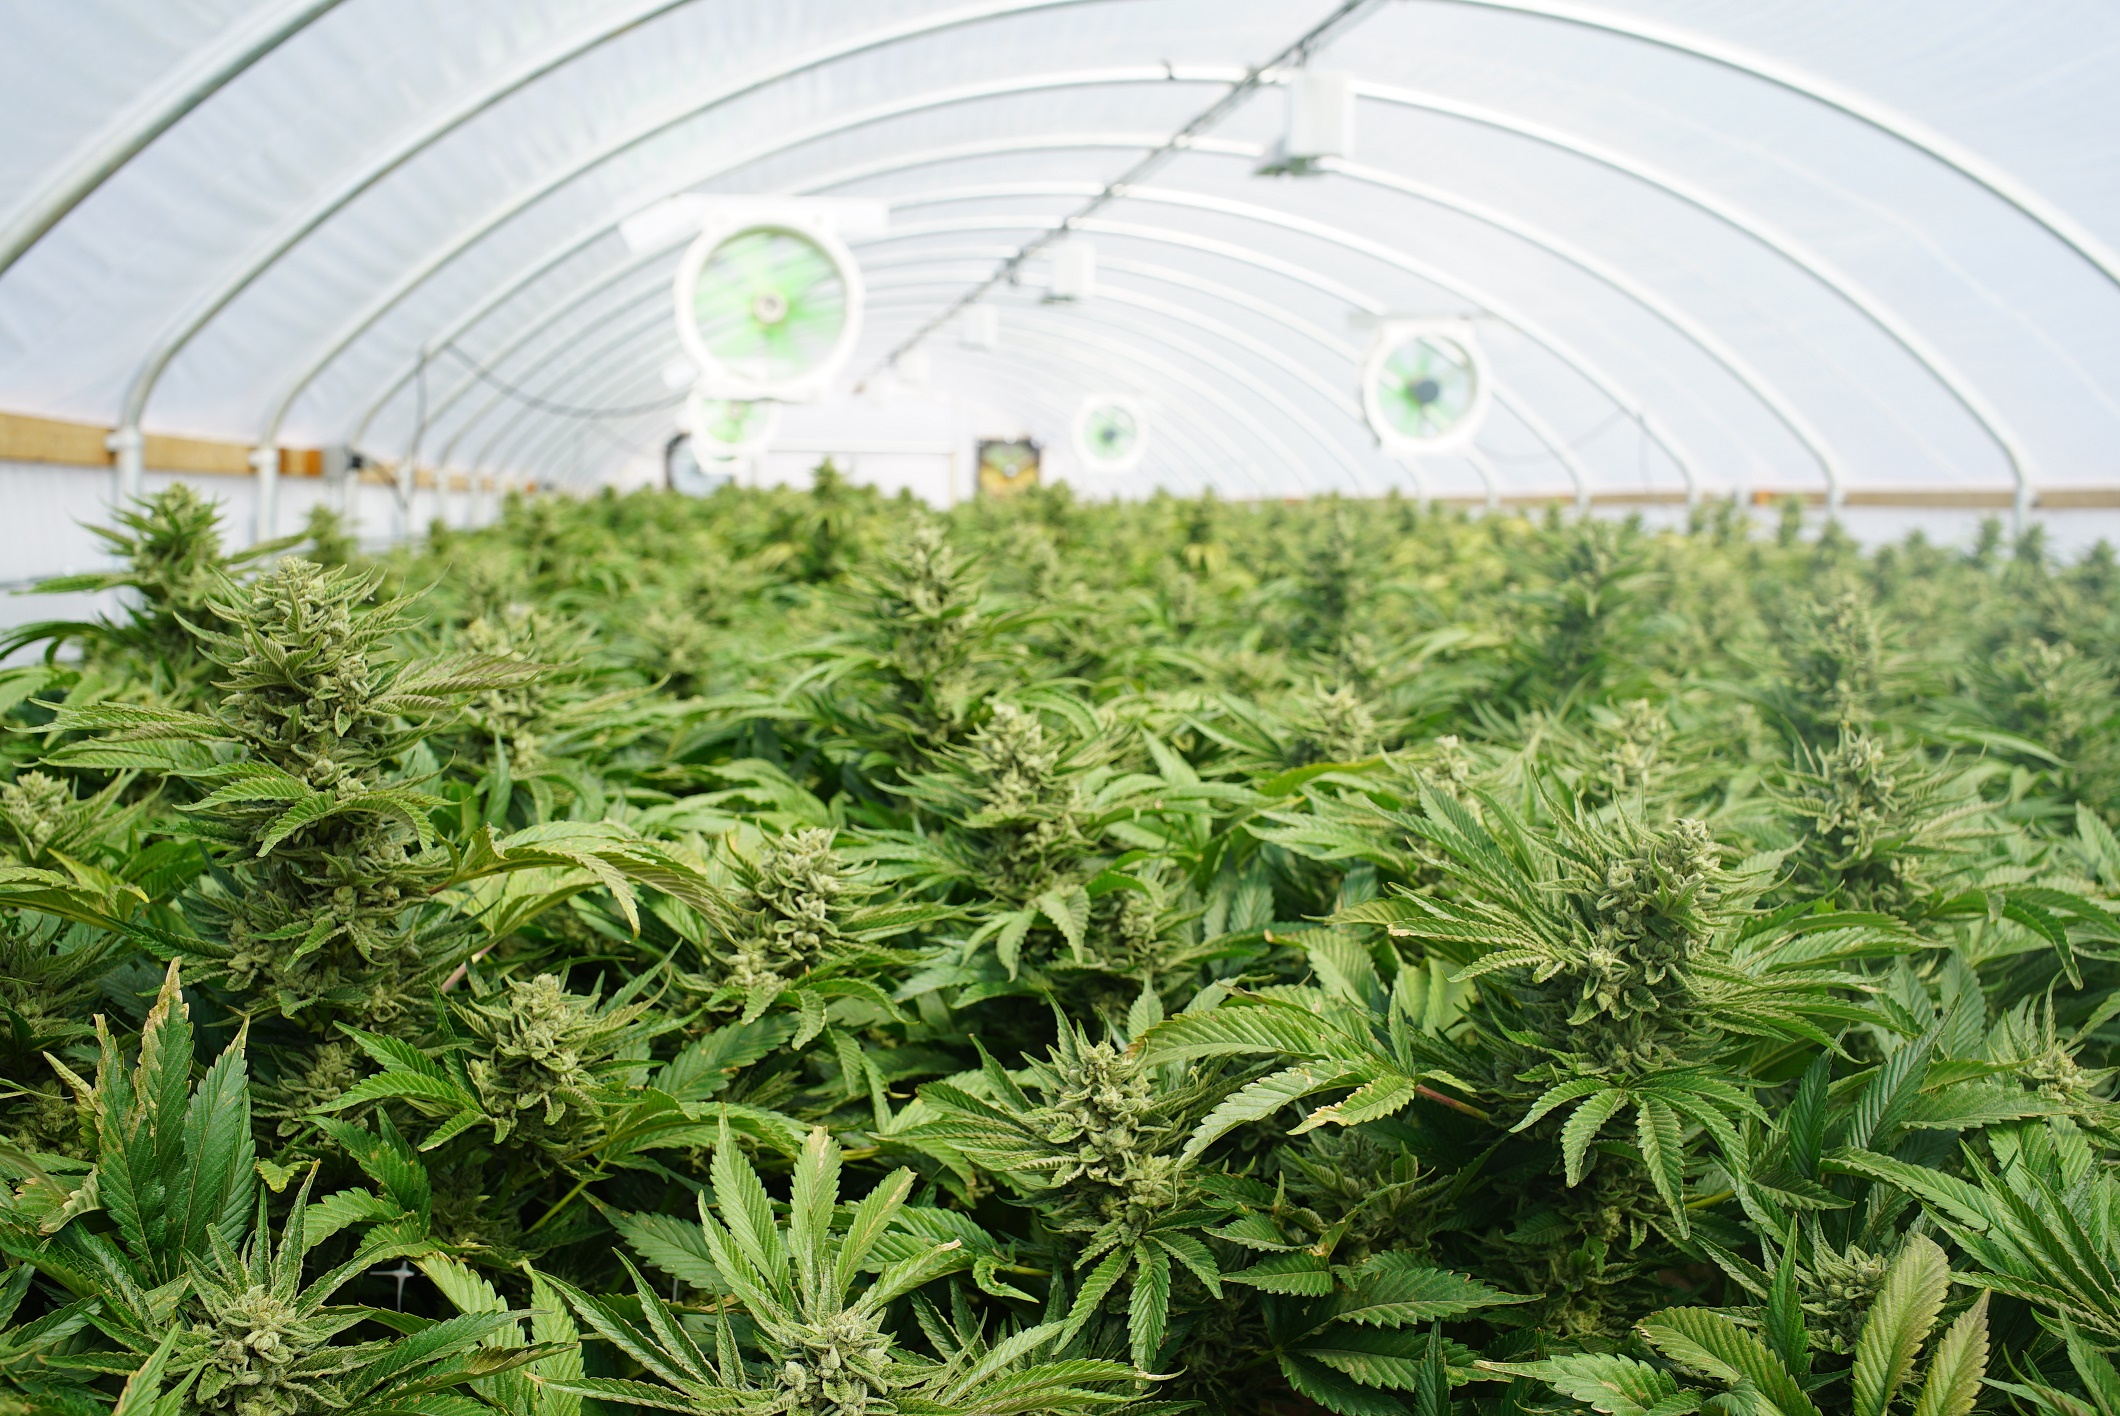 Should You Own Aurora Cannabis Inc. (TSX:ACB) and Aphria Inc. (TSX:APHA) Stock in Your Portfolio in 2019?